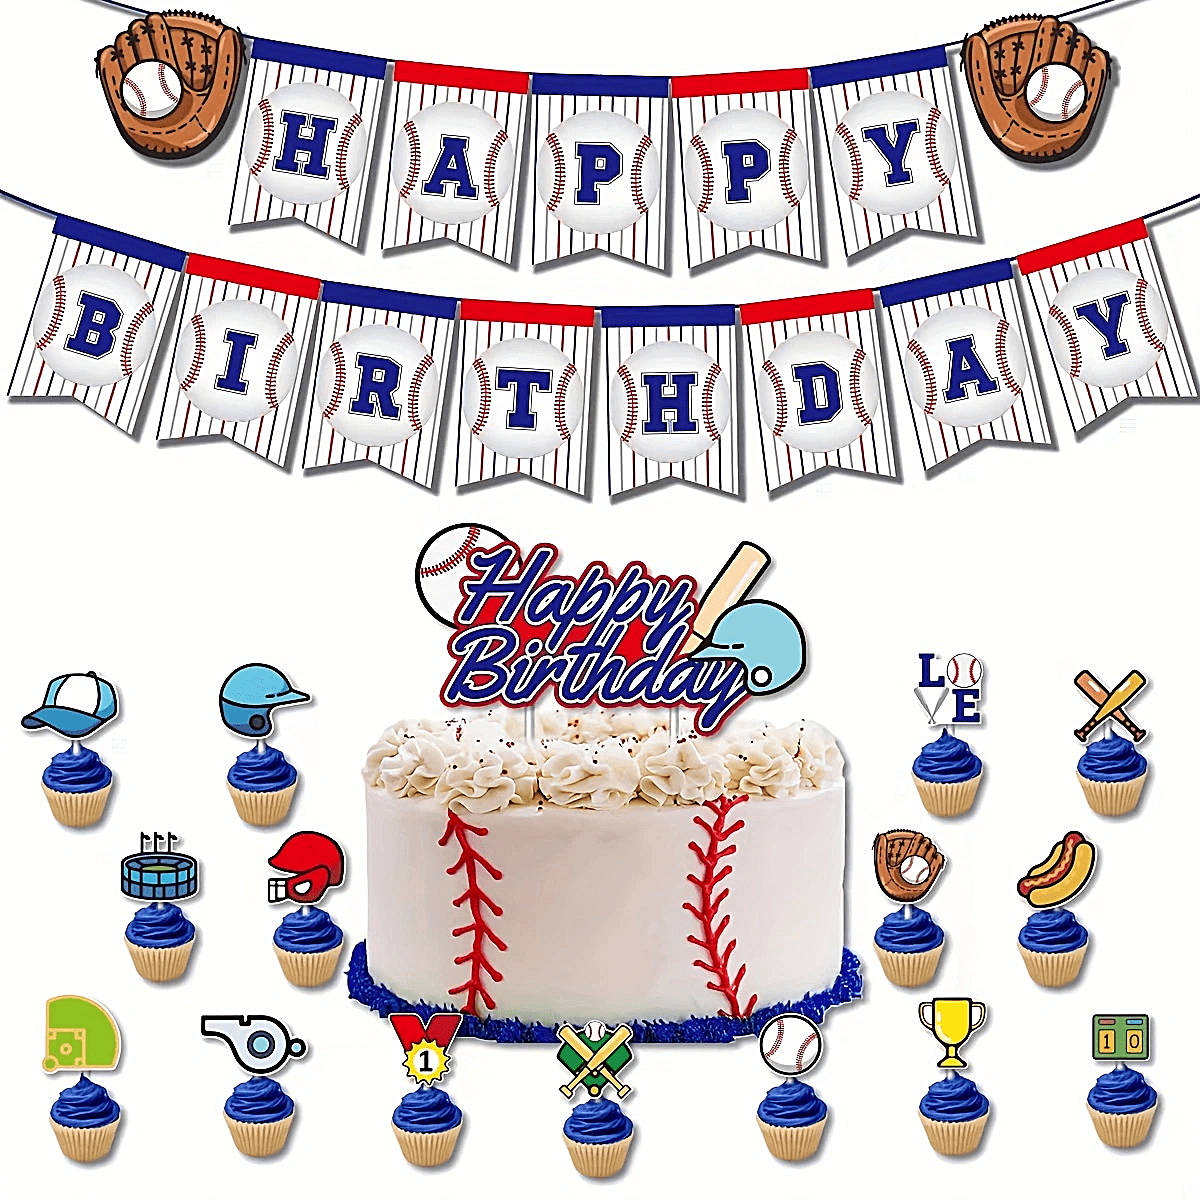 Baseball Cake Decorations Sports Theme Party Decoration Supplies Baseball Themed Happy Birthday Cake Topper Party Decorations